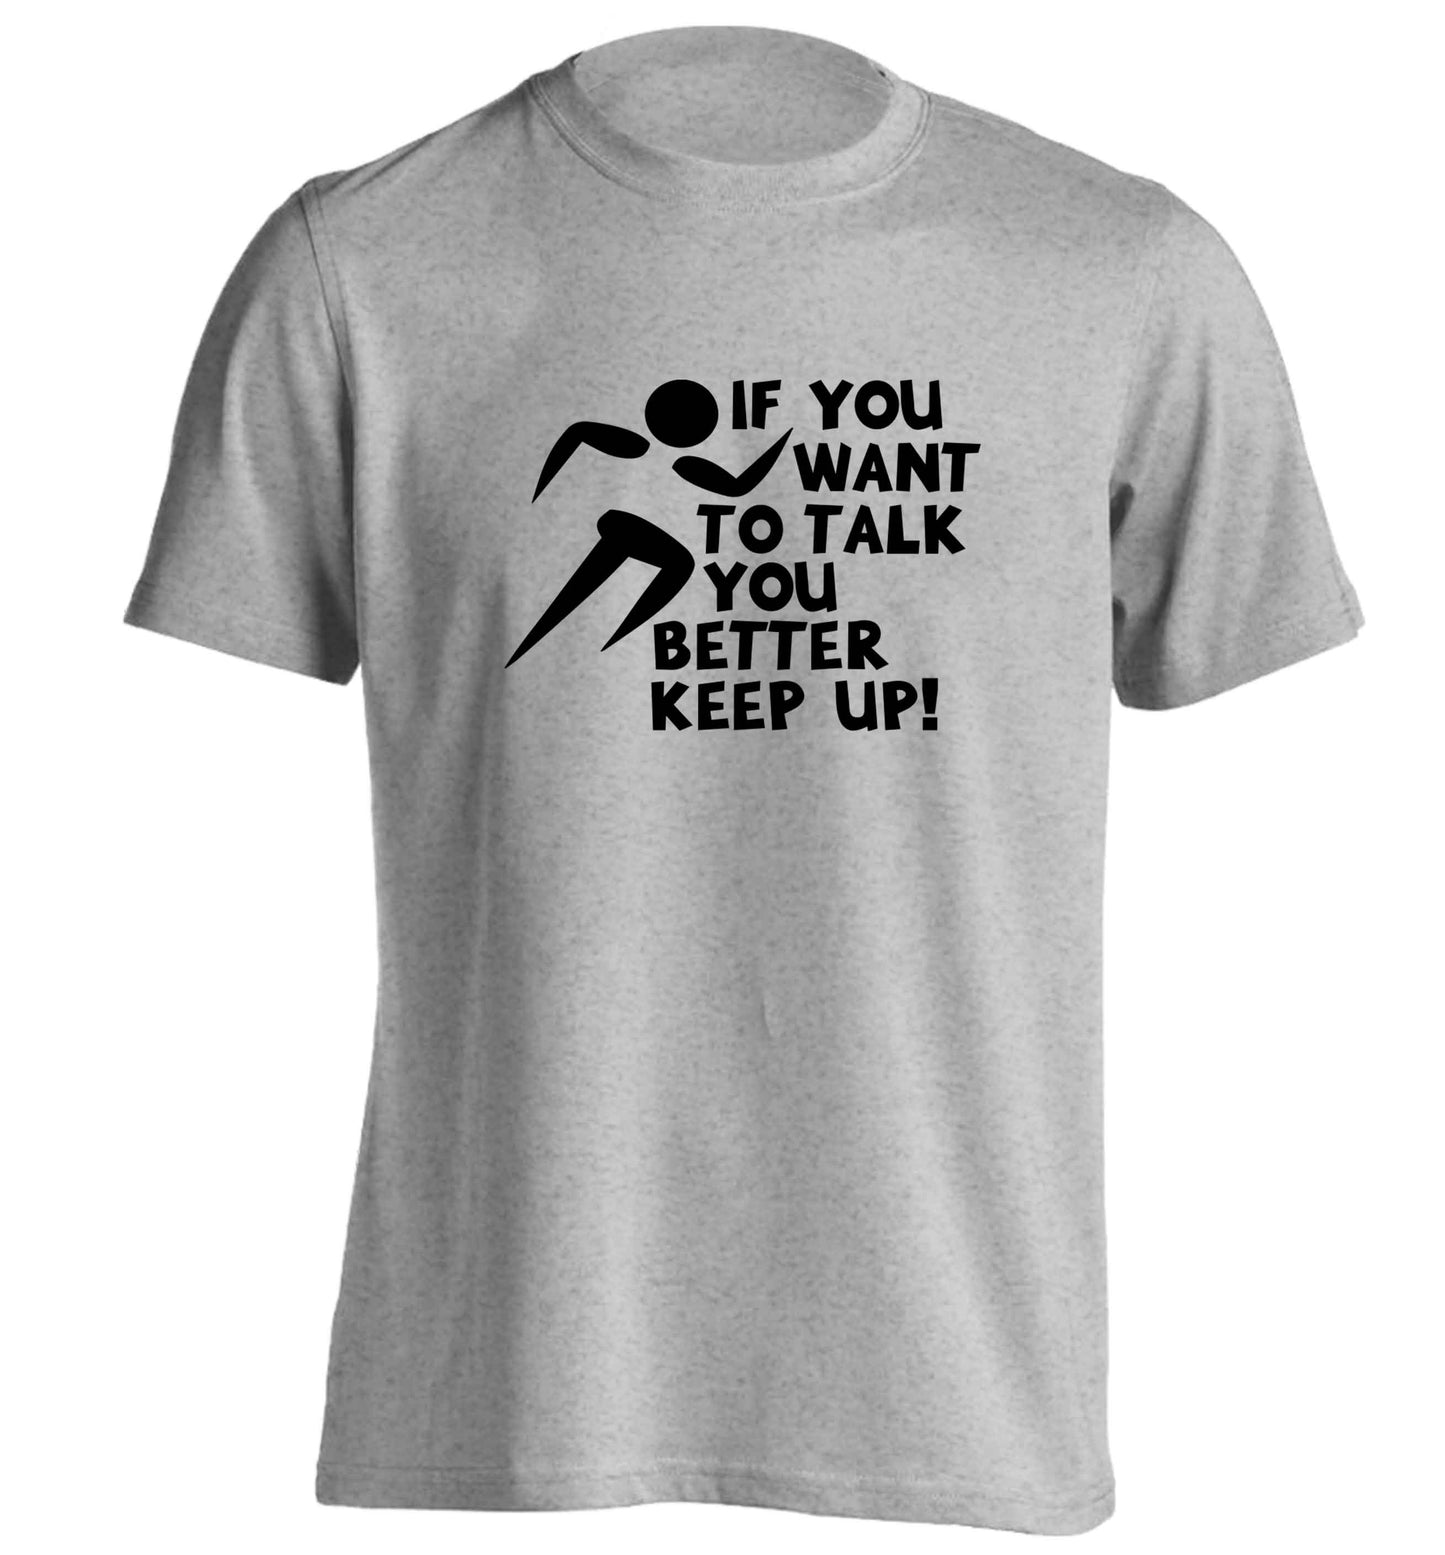 If you want to talk you better keep up! adults unisex grey Tshirt 2XL